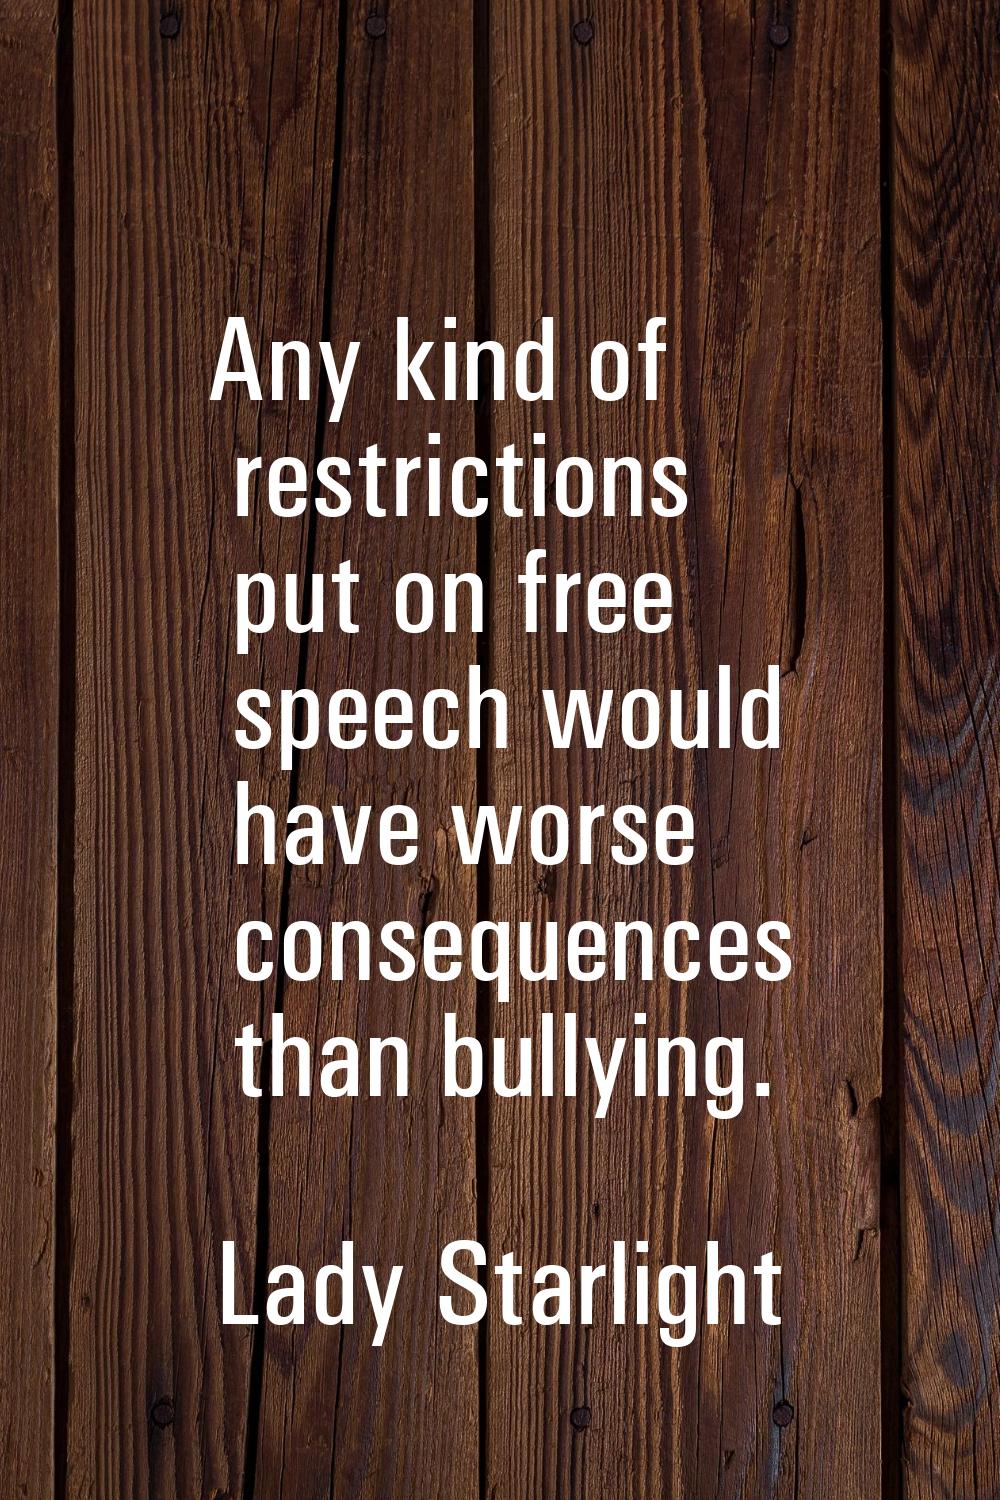 Any kind of restrictions put on free speech would have worse consequences than bullying.